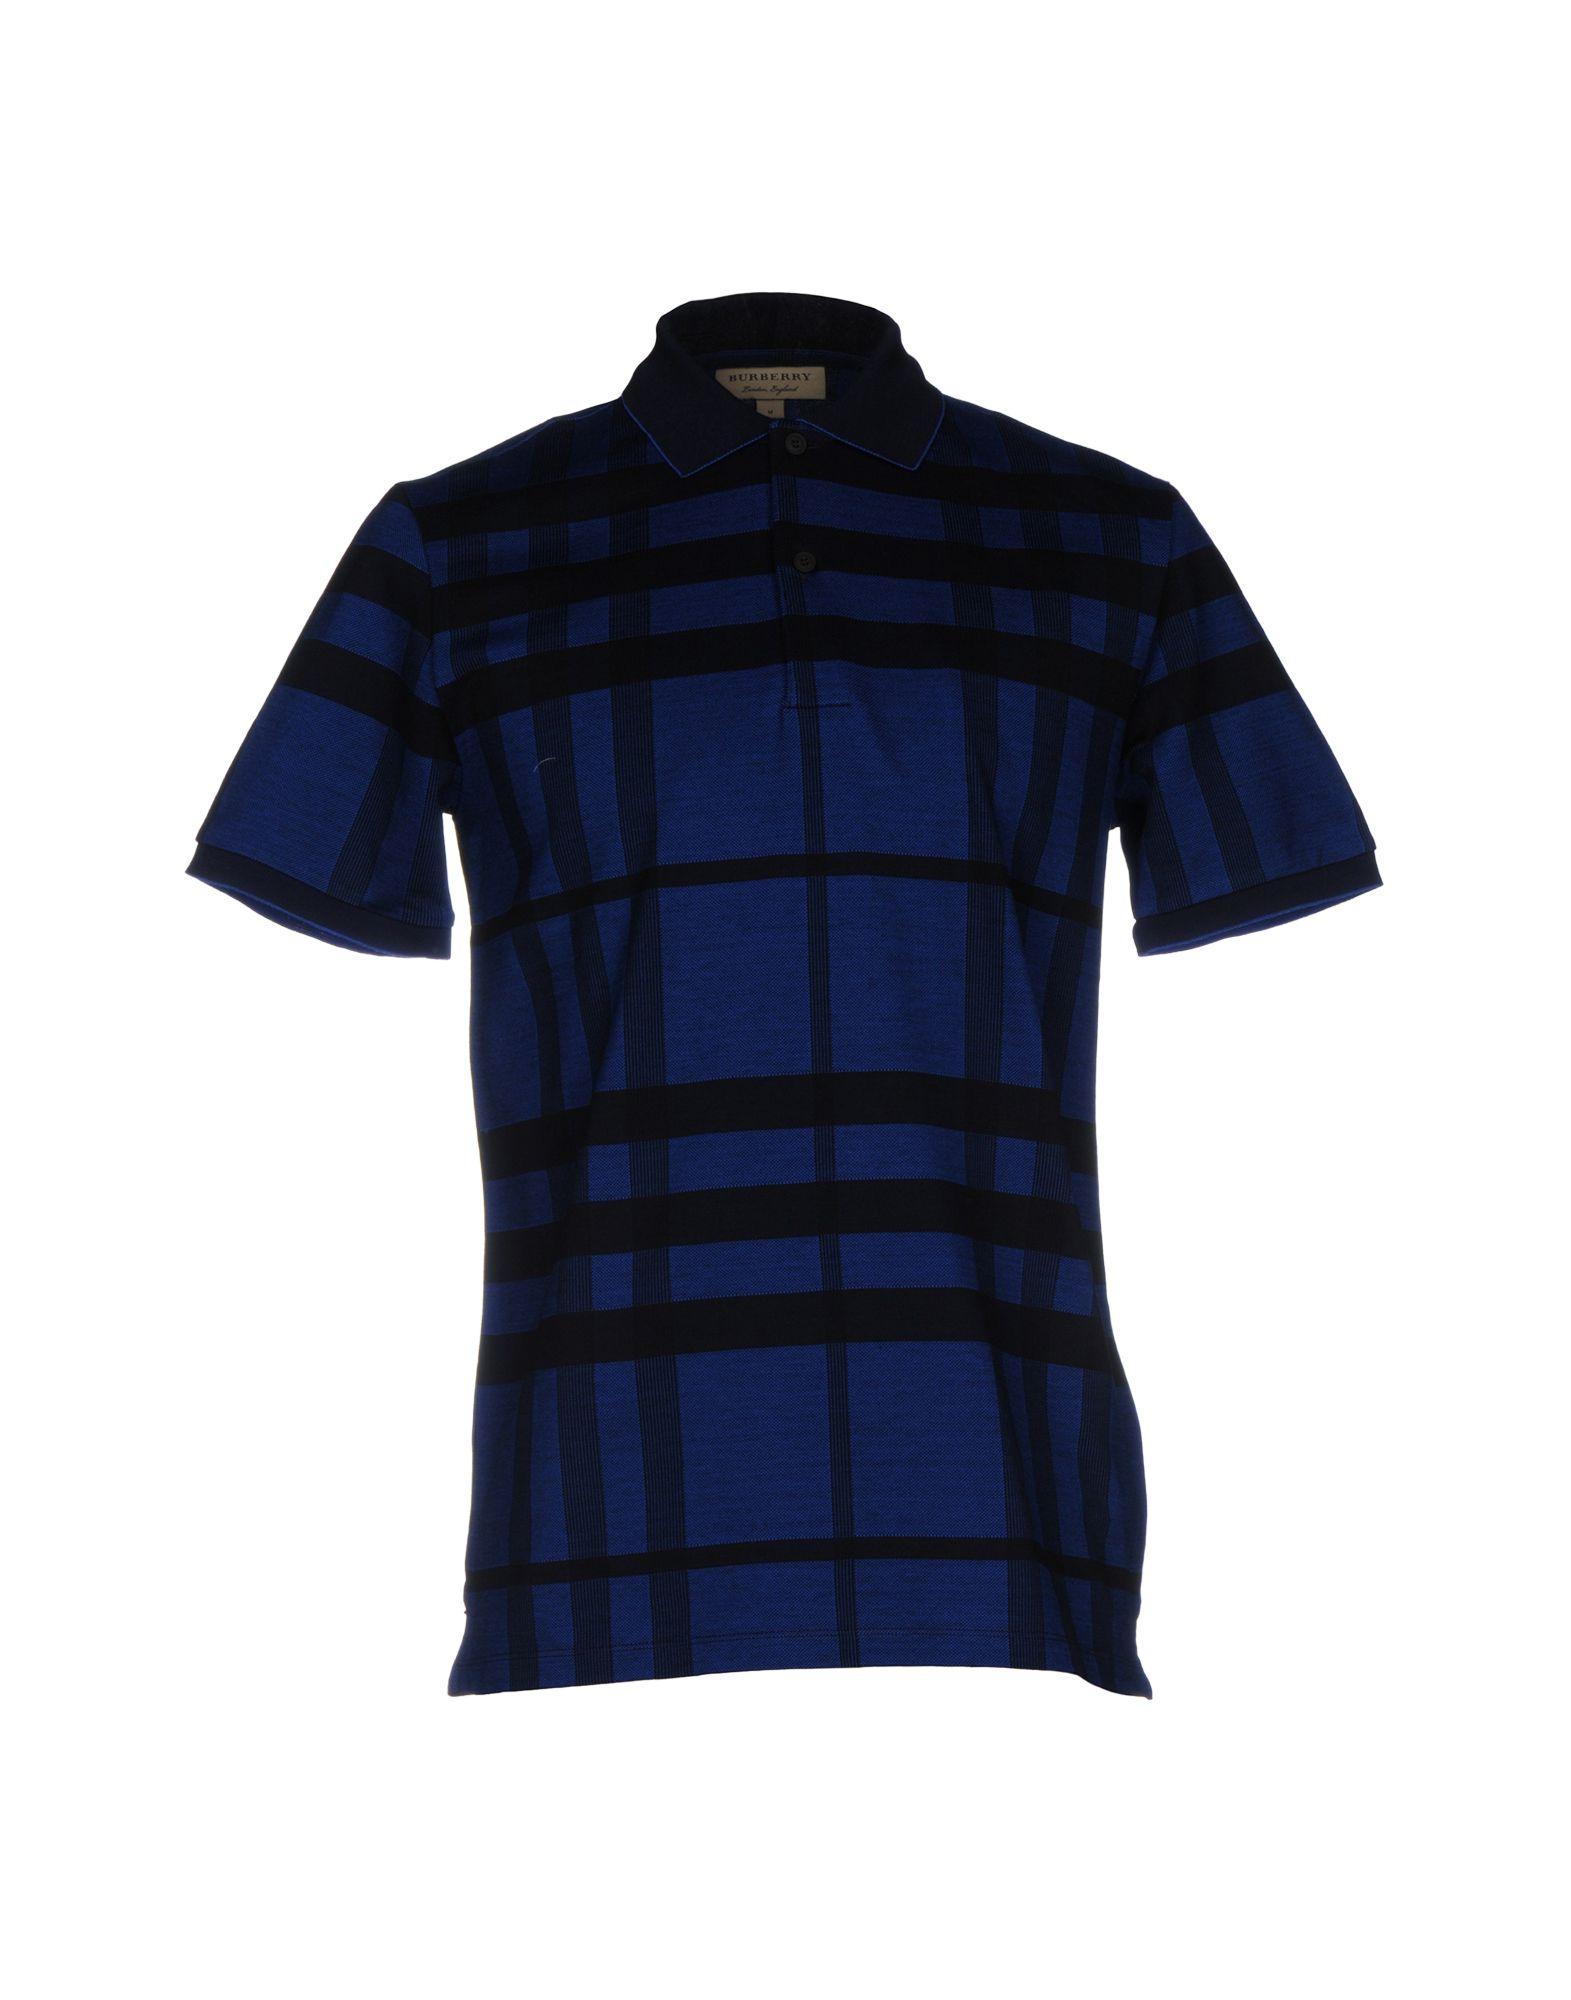 Lyst - Burberry Polo Shirt in Blue for Men